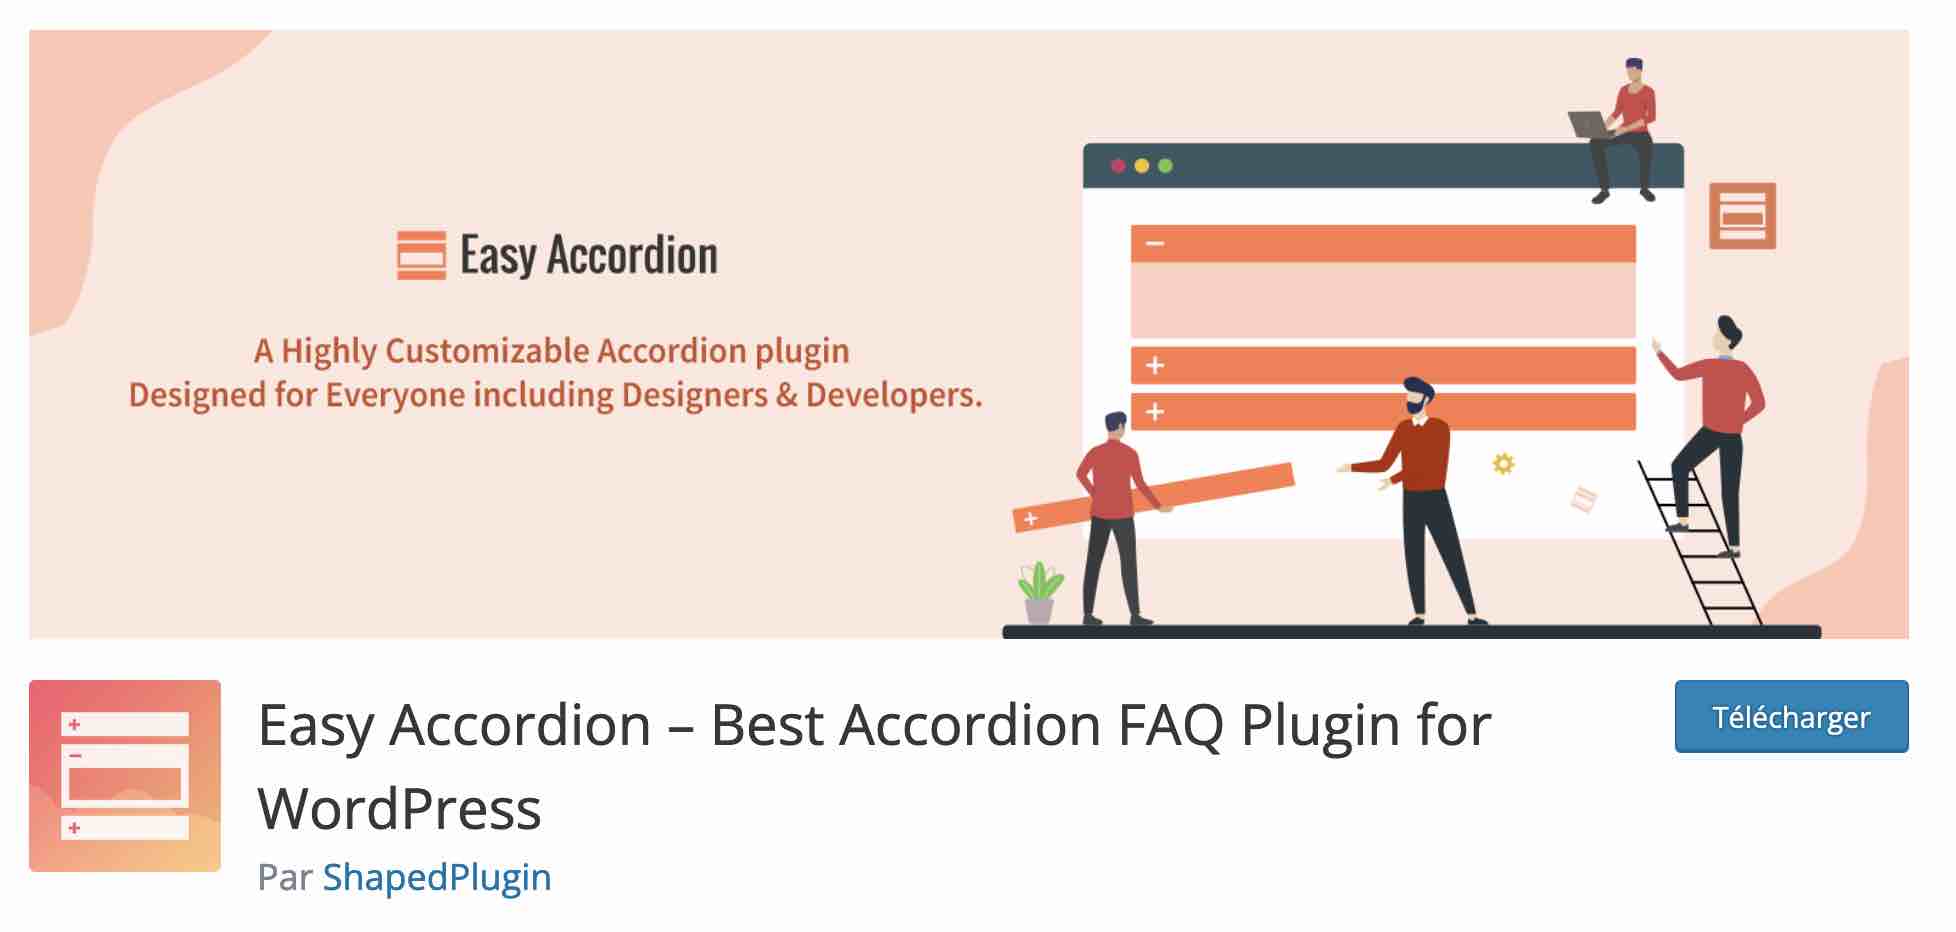 Easy Accordion is a handy WordPress plugin for creating FAQs.